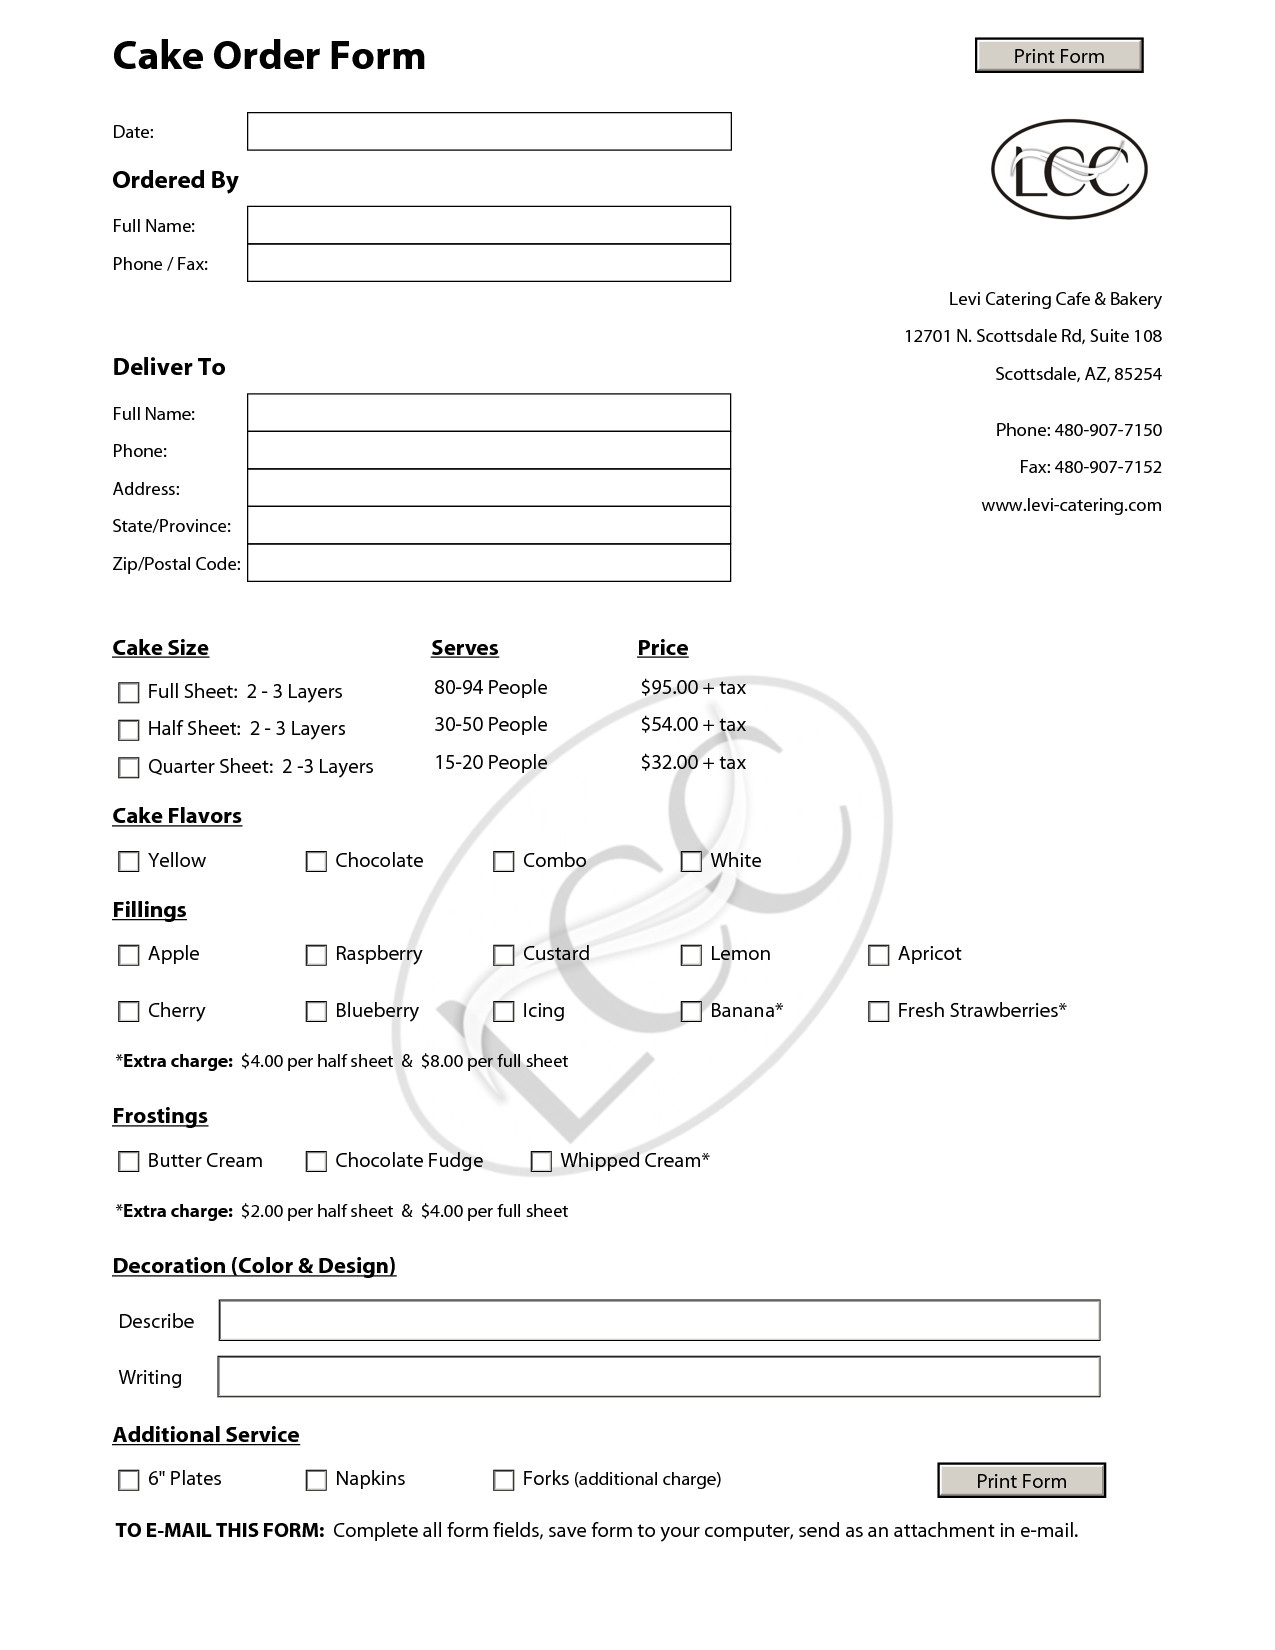 Cake order forms Templates Cake order forms On Pinterest